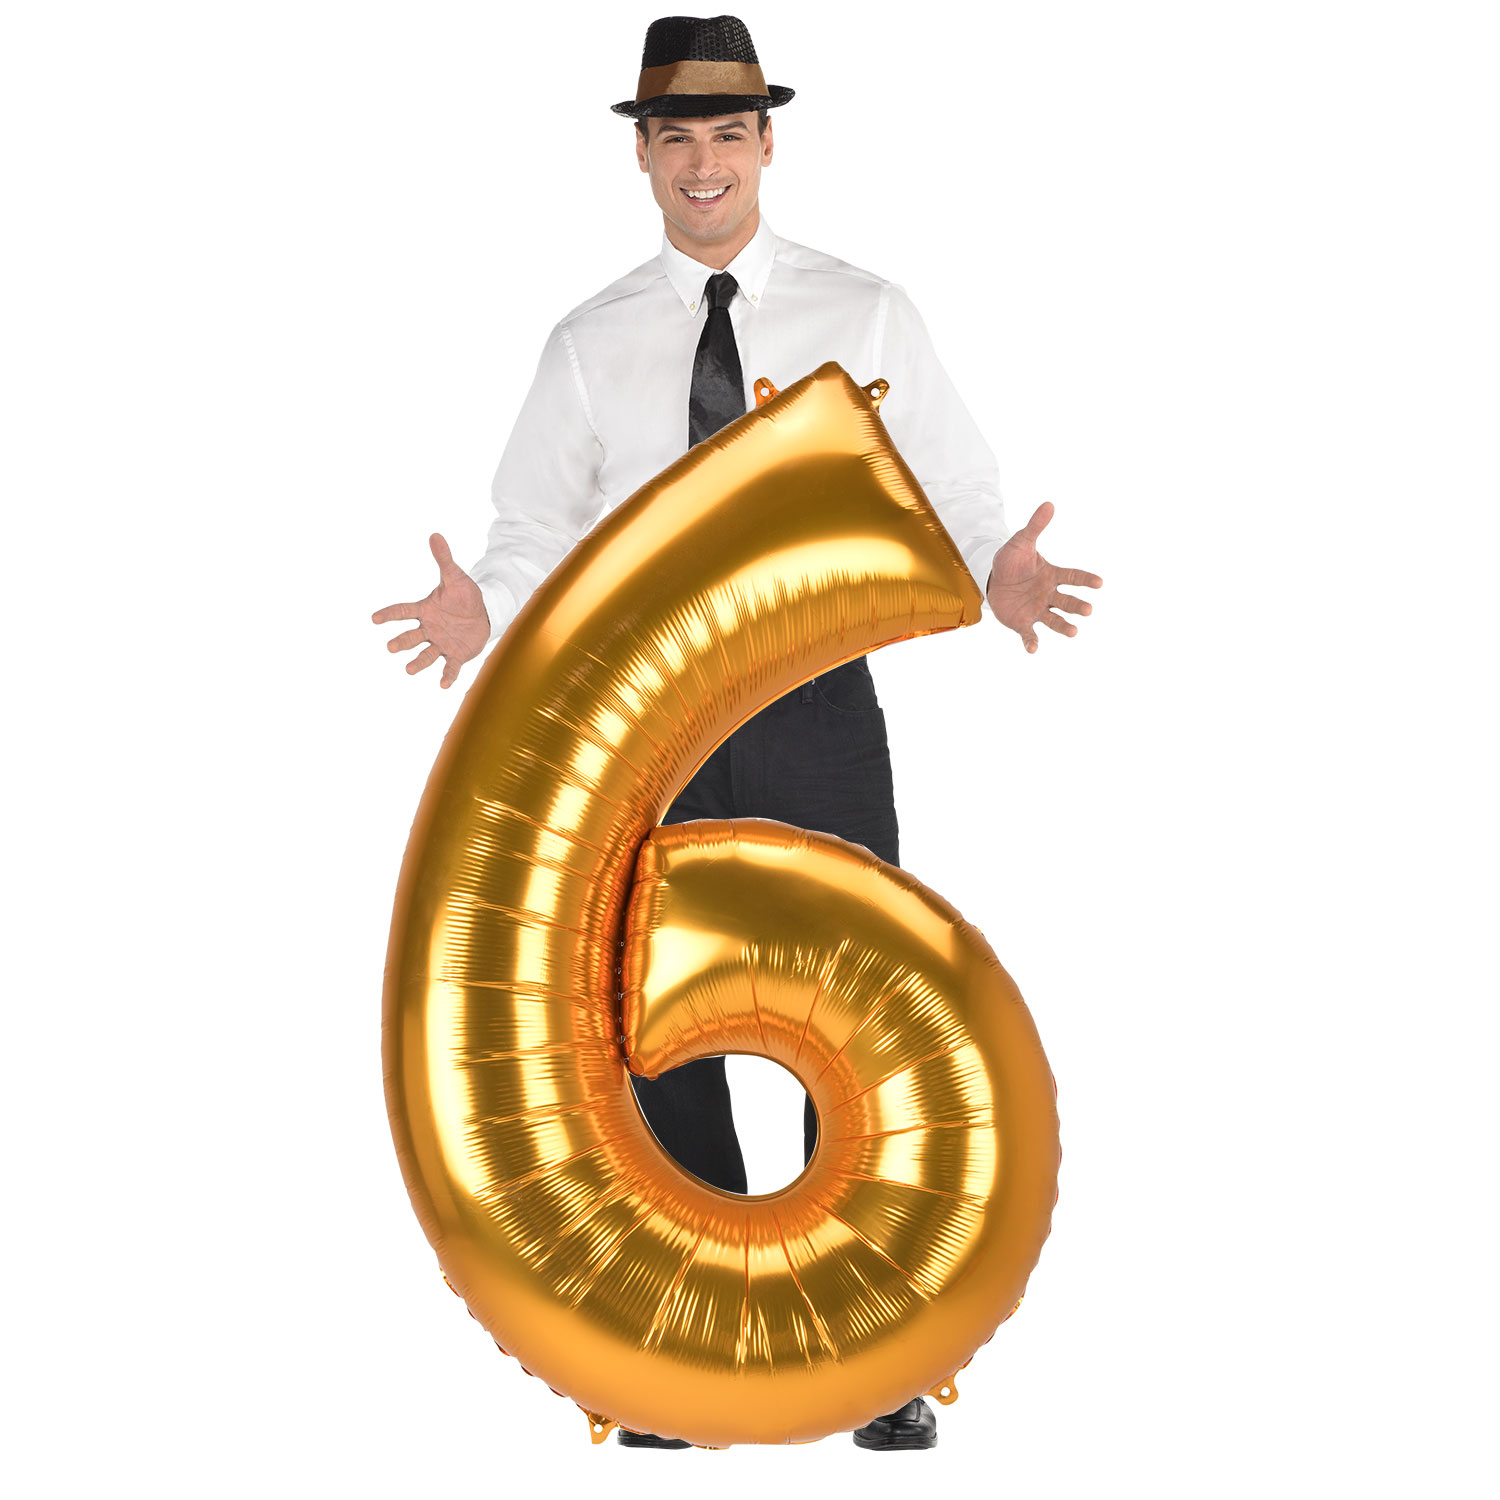 JUMBO 53-Inch Gold Foil Number 6 Balloon (Deflated) 